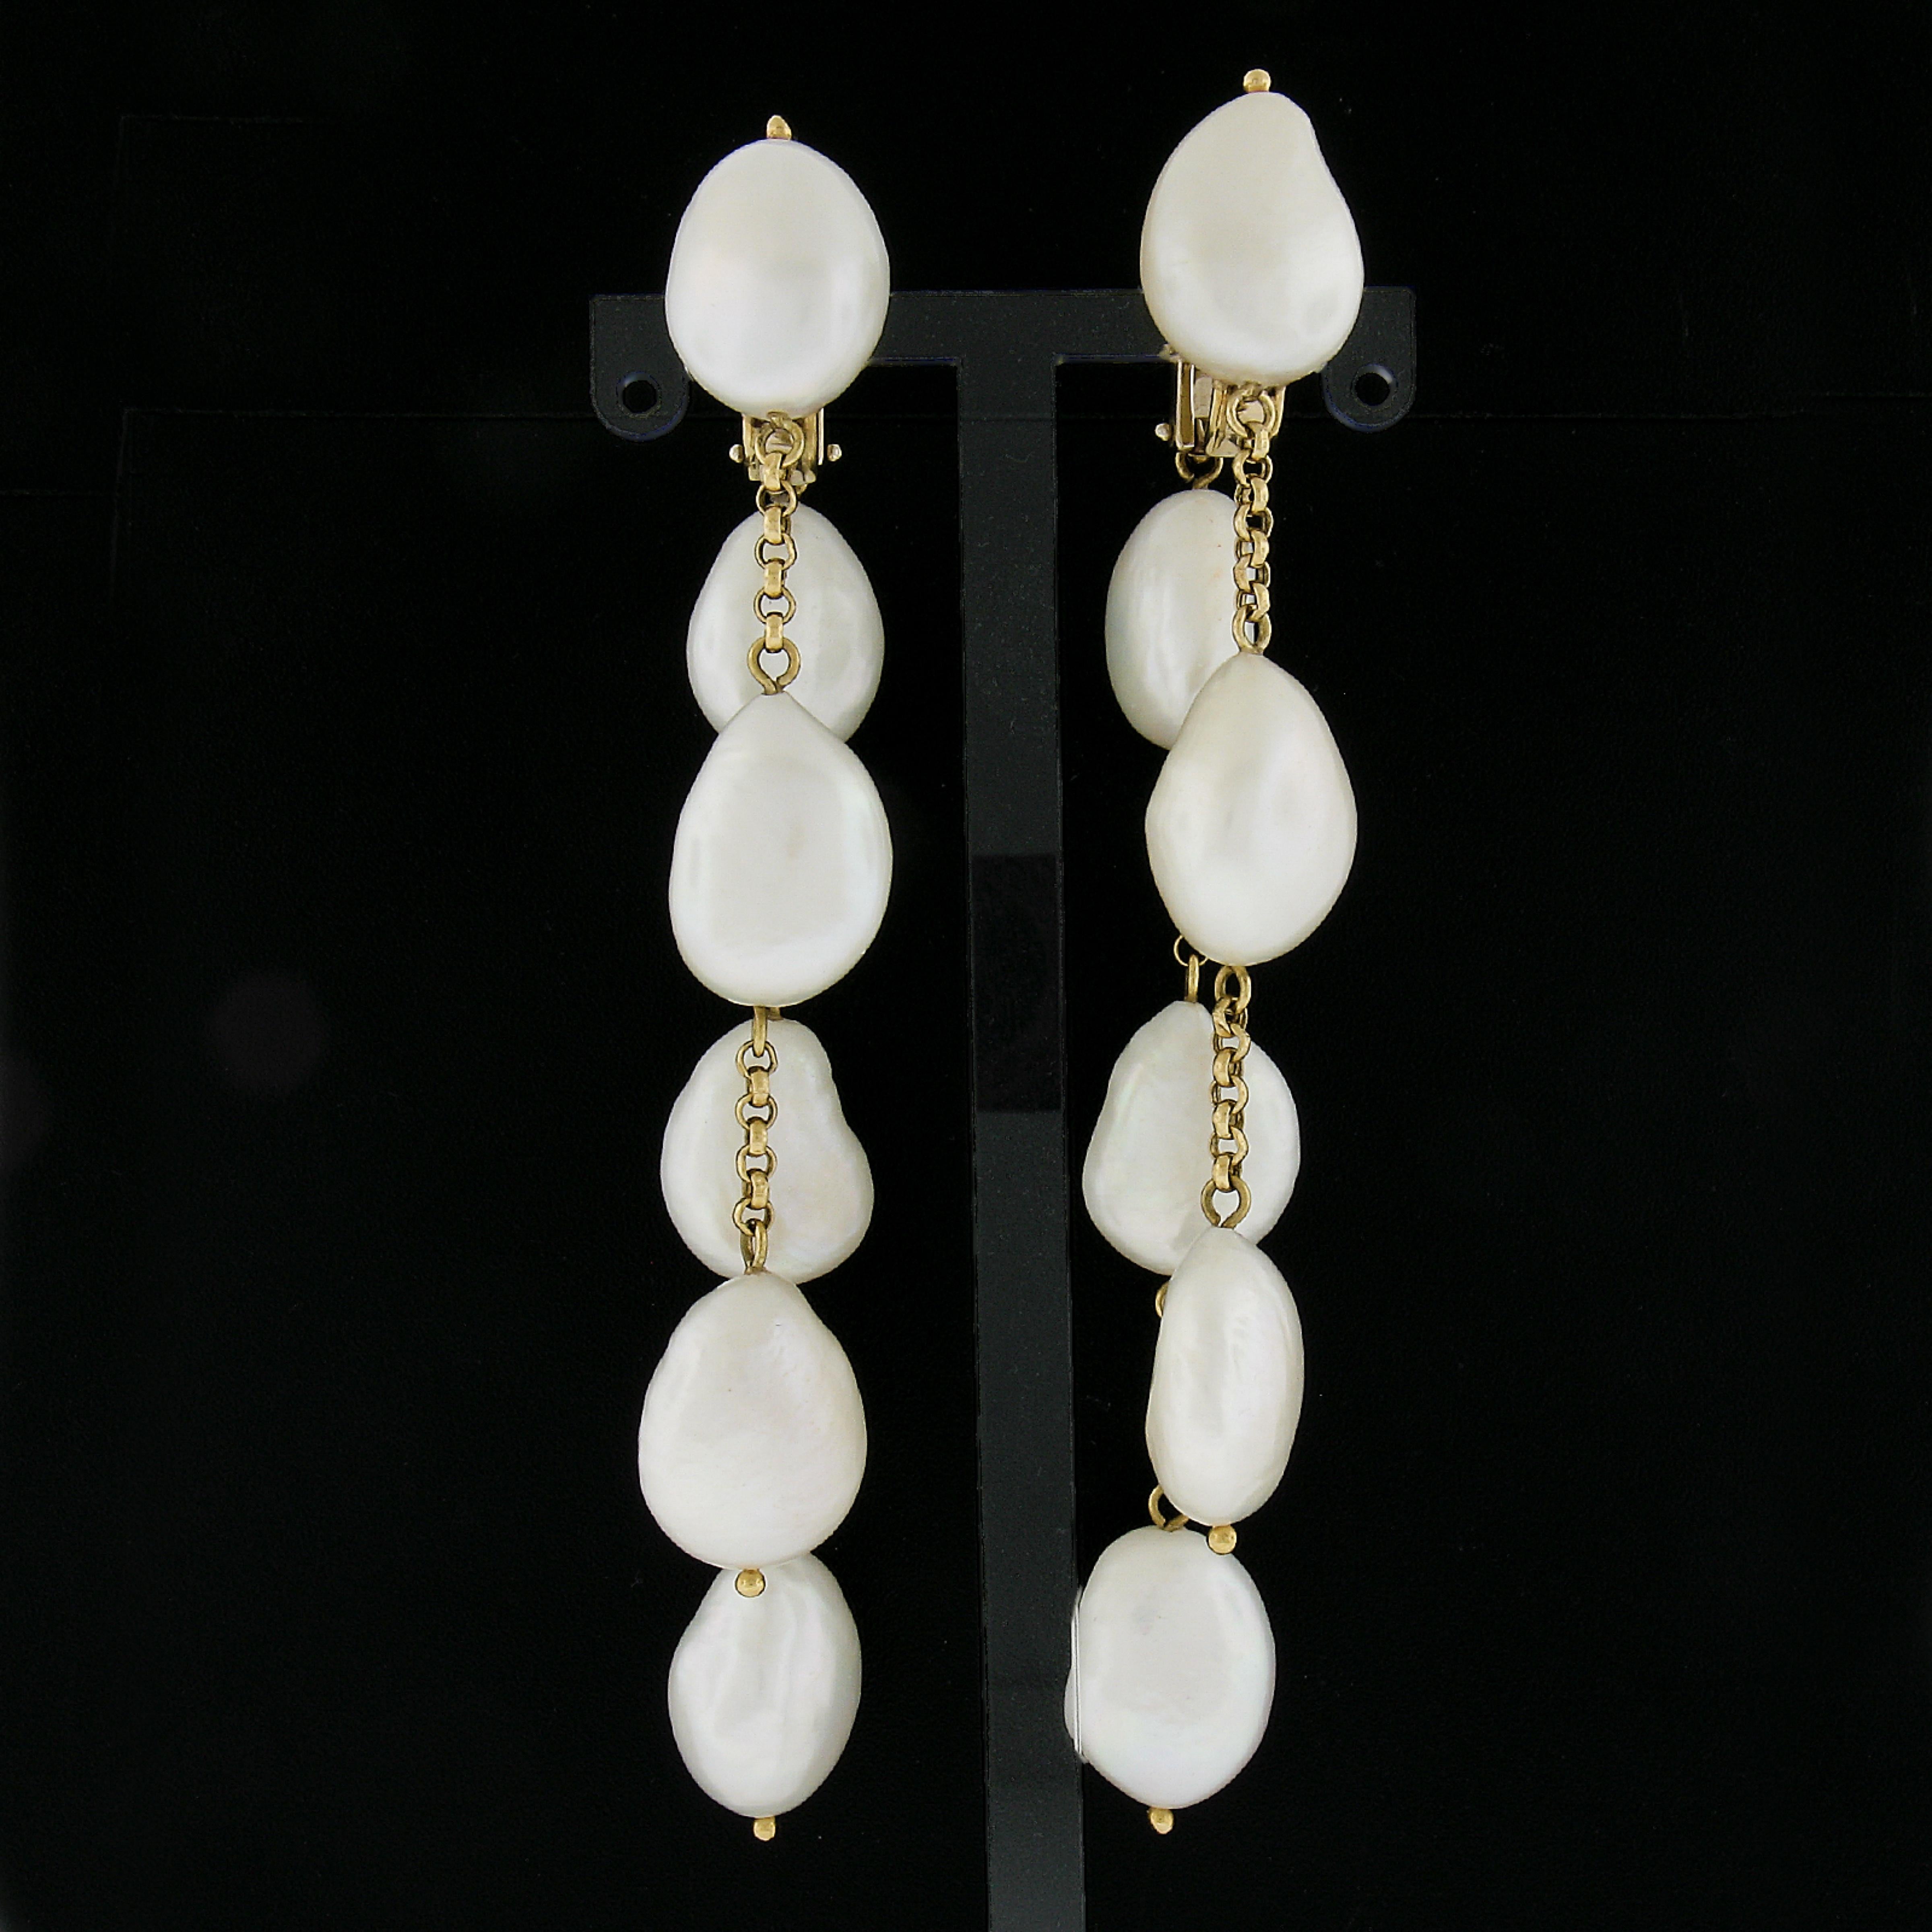 --Stone(s):--
(12) Genuine Cultured Pearls - Baroque Shape - Nice White Color w/ Pink Overtone - Great Luster - 18.4x13.1mm each (approx.)

Material: Solid 18k Yellow Gold w/ White Gold Accents in the Backs
Weight: 41.99 Grams
Backing: Clip On